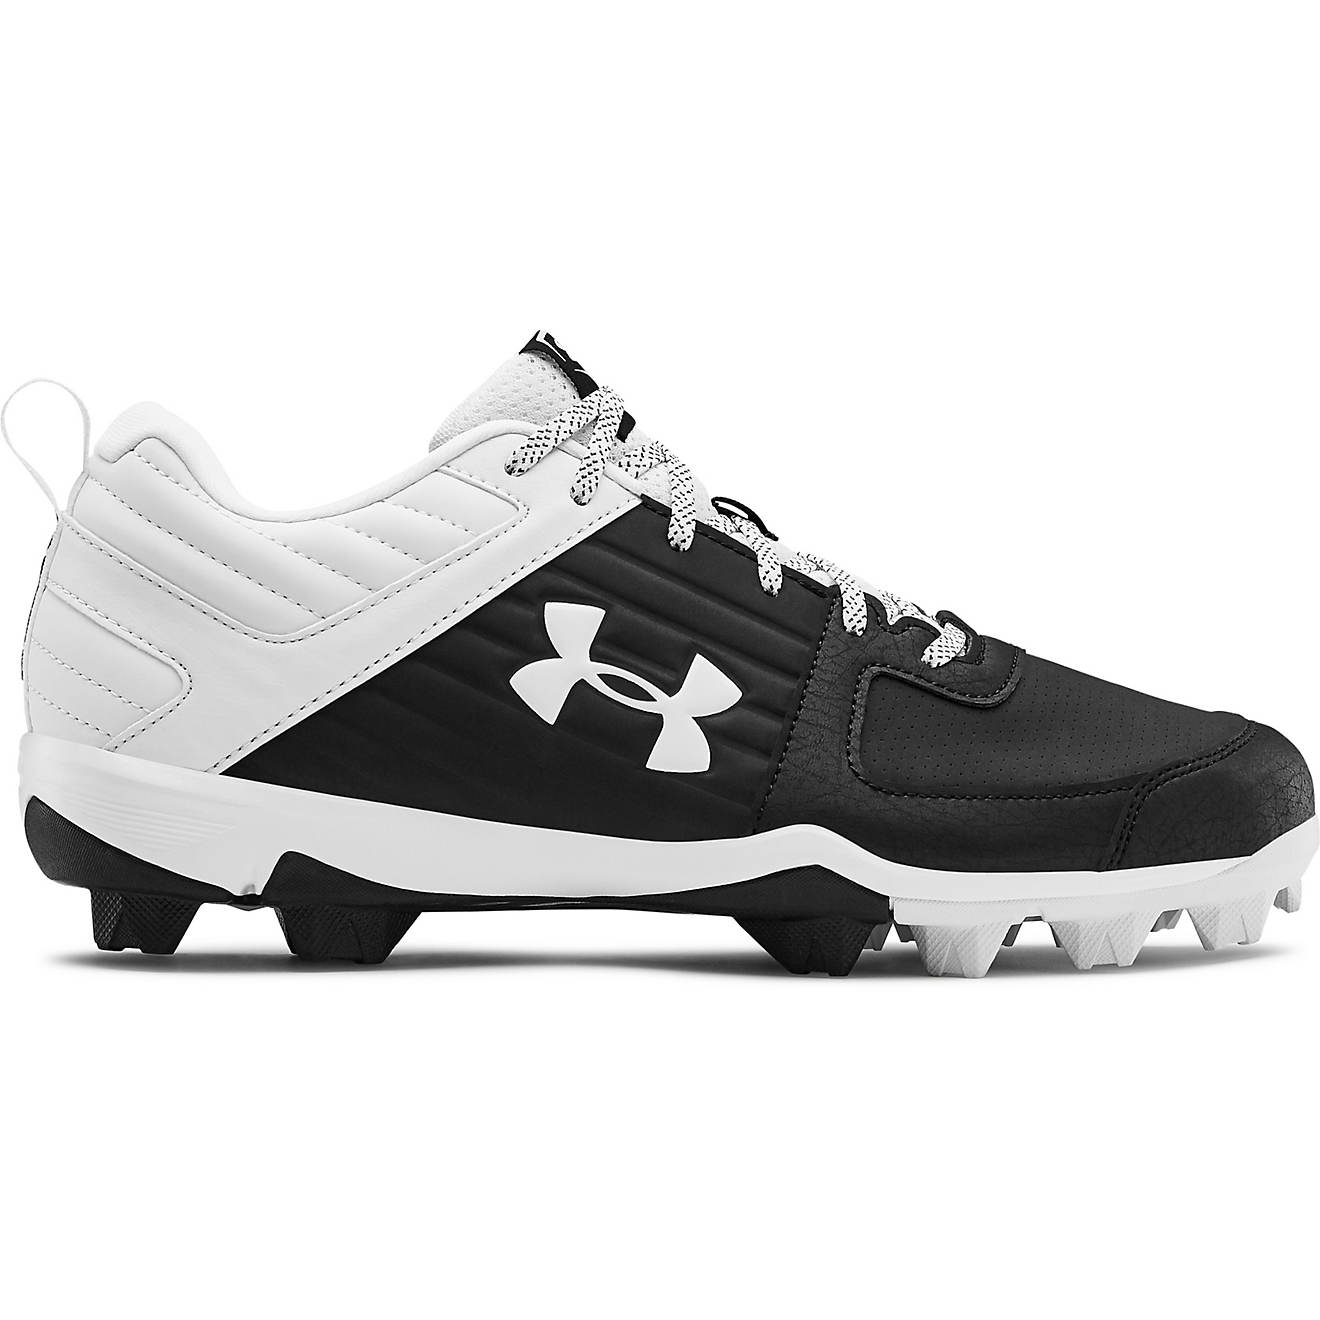 NWOB Under Armour Men's Leadoff Low RM Molded Baseball Cleats White/Black 10 11